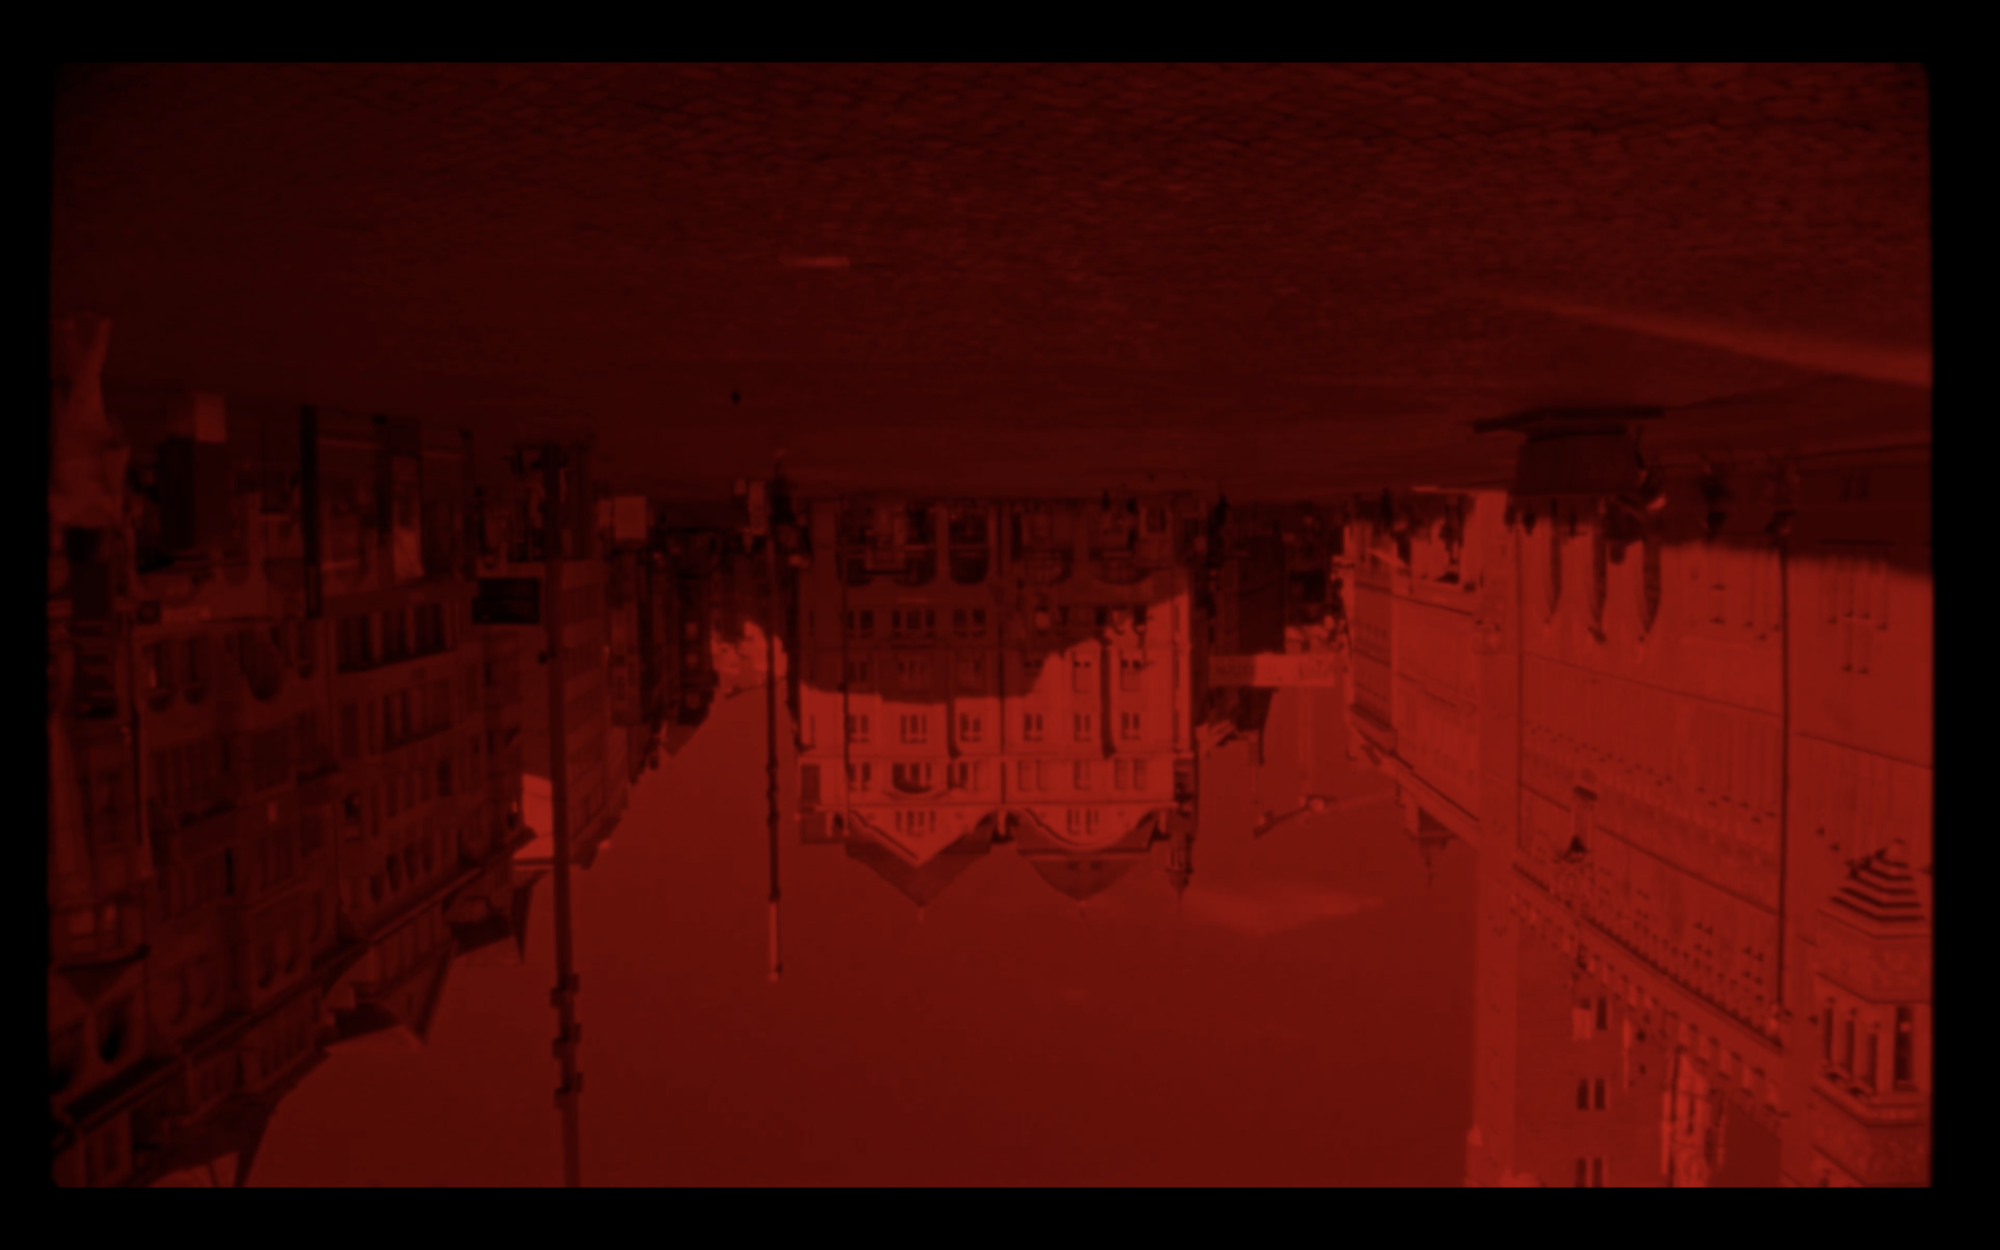 An upside-down image of a plaza surrounded by buildings. The entire image is cast in a blood red hue.